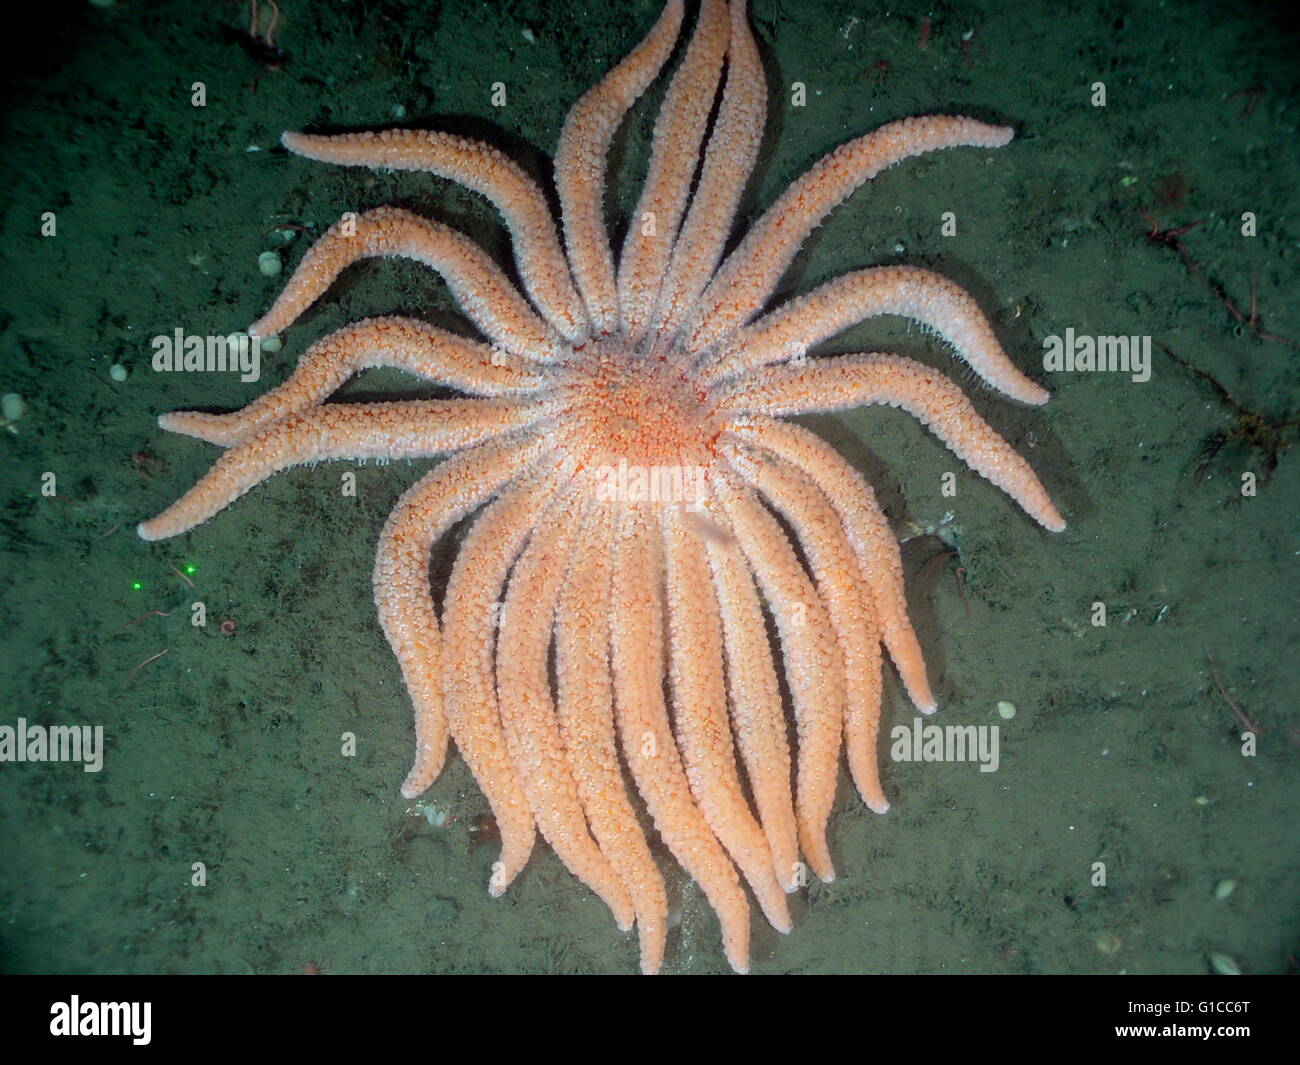 Sunflower Sea star (Pycnopodia Helianthoides). It is among the largest sea stars in the world and has a maximum arm span of one metre. Stock Photo